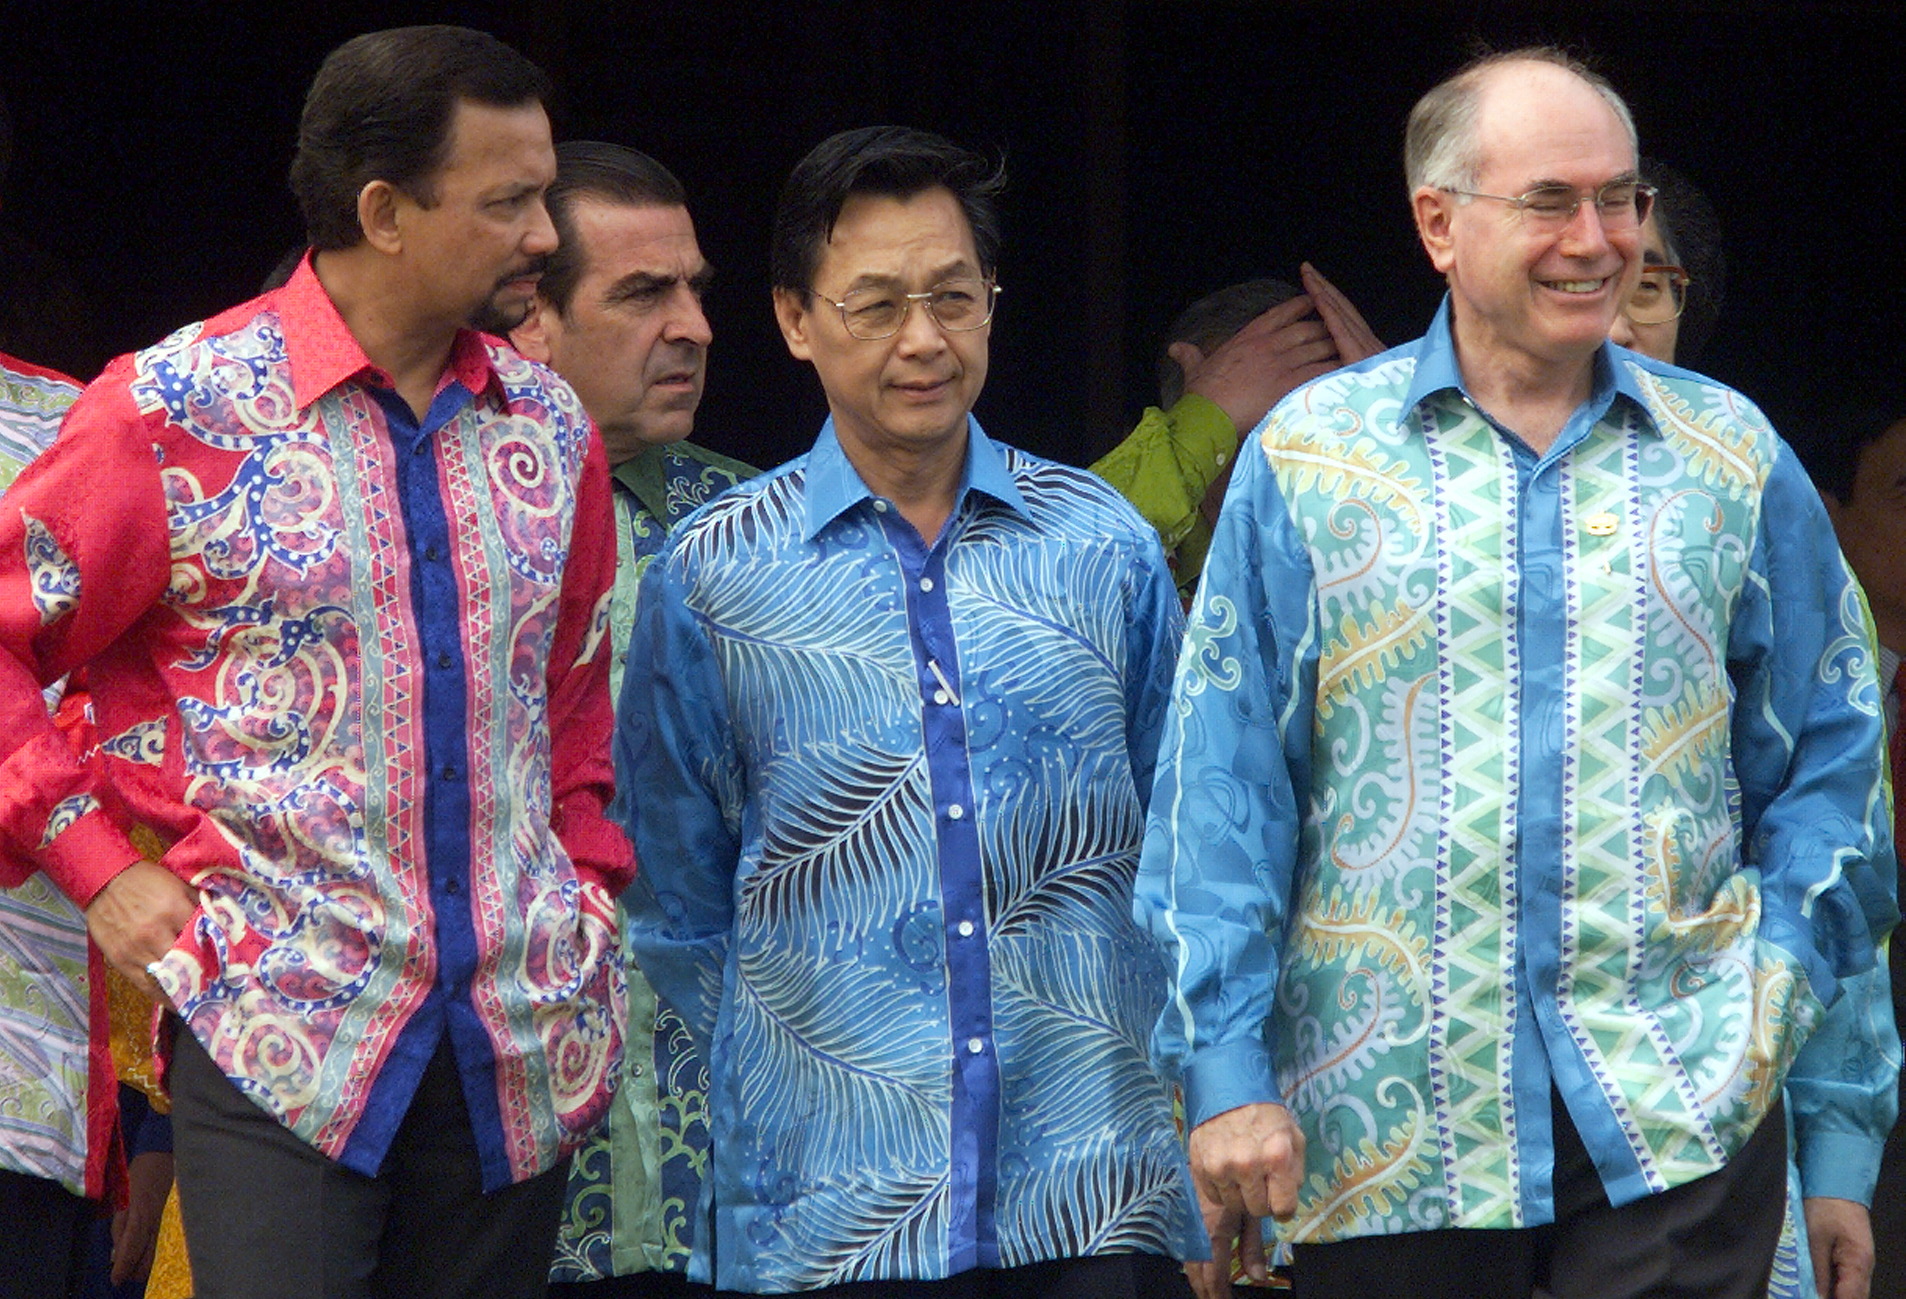 World leaders donned traditional Malaysian attire for a group photo.